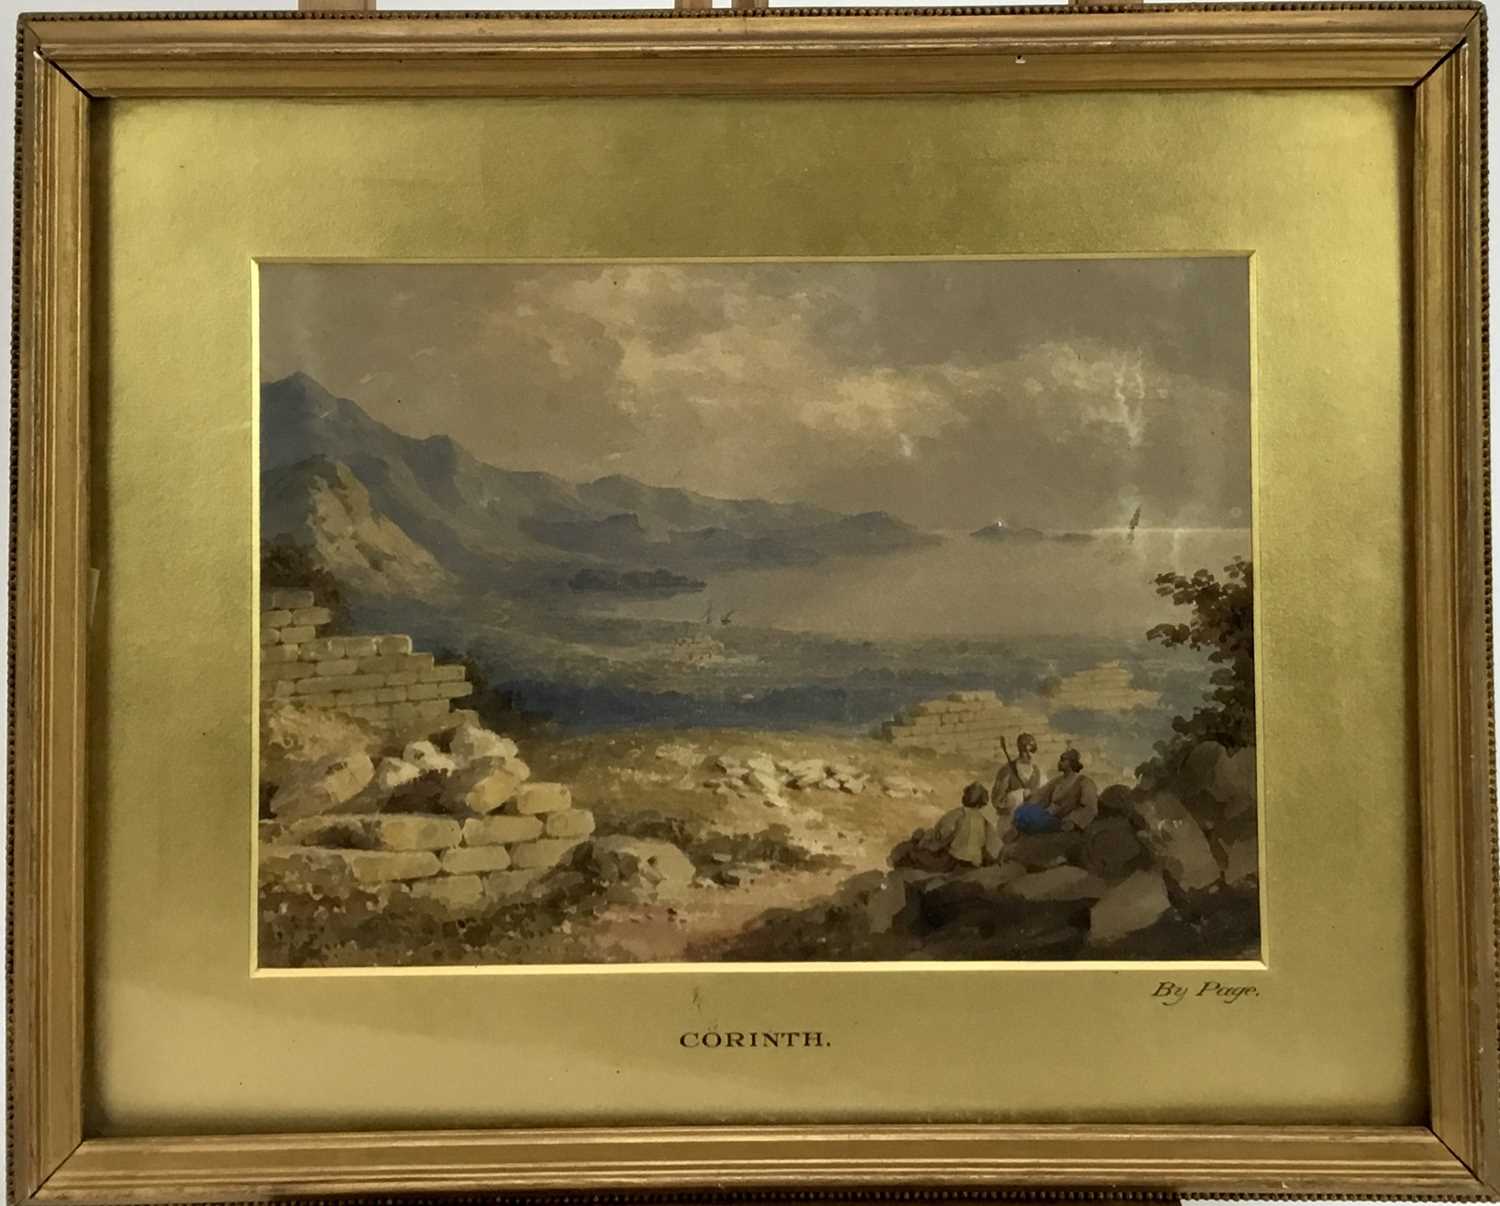 Lot 18 - Attributed to William Page (1794- 1874) watercolour - 'Corinth', 29cm x 20cm, in glazed gilt frame